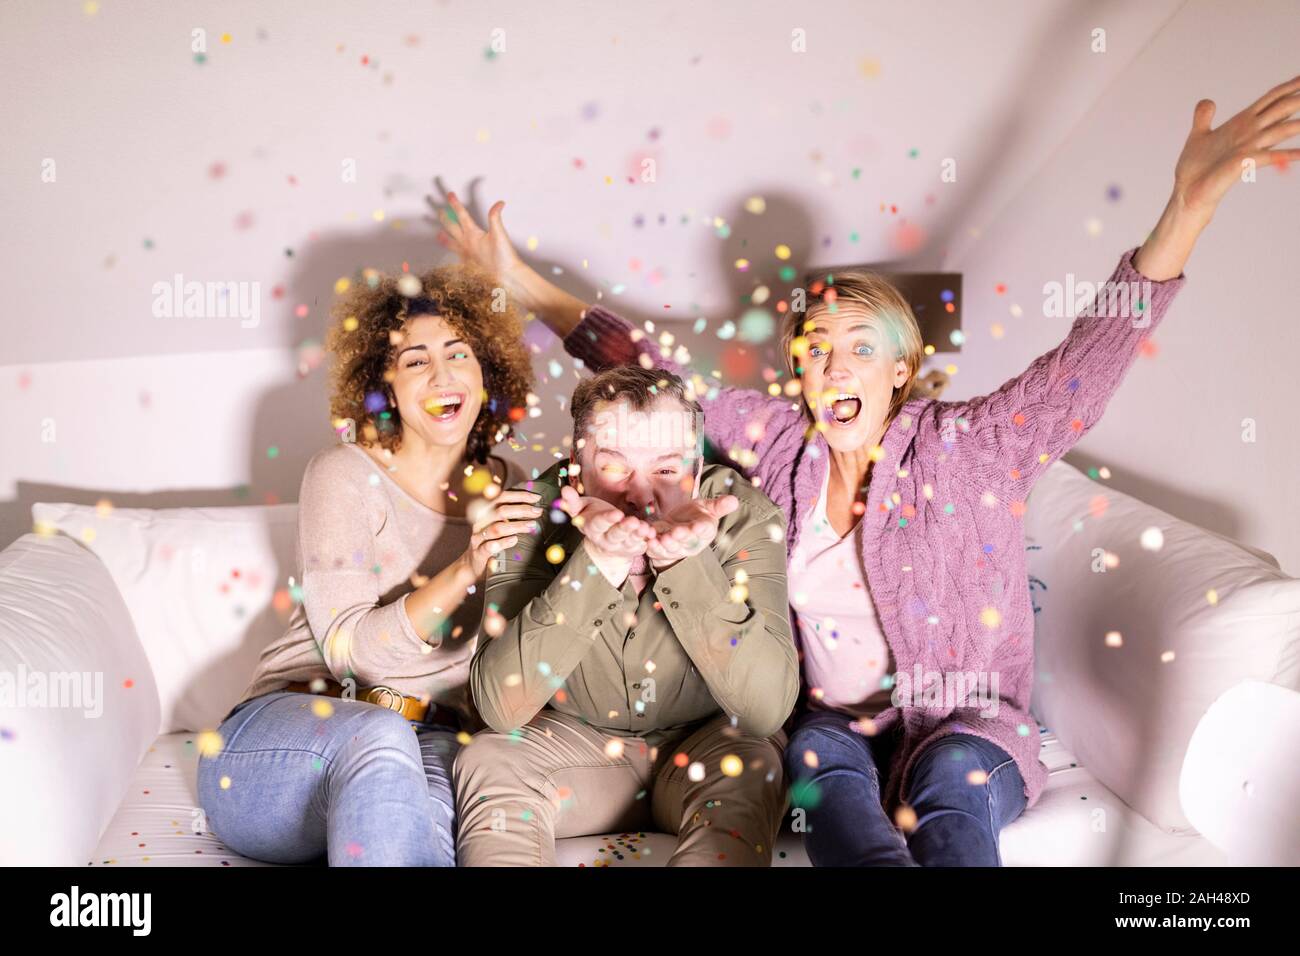 Best friends celebrating party with confetti Stock Photo